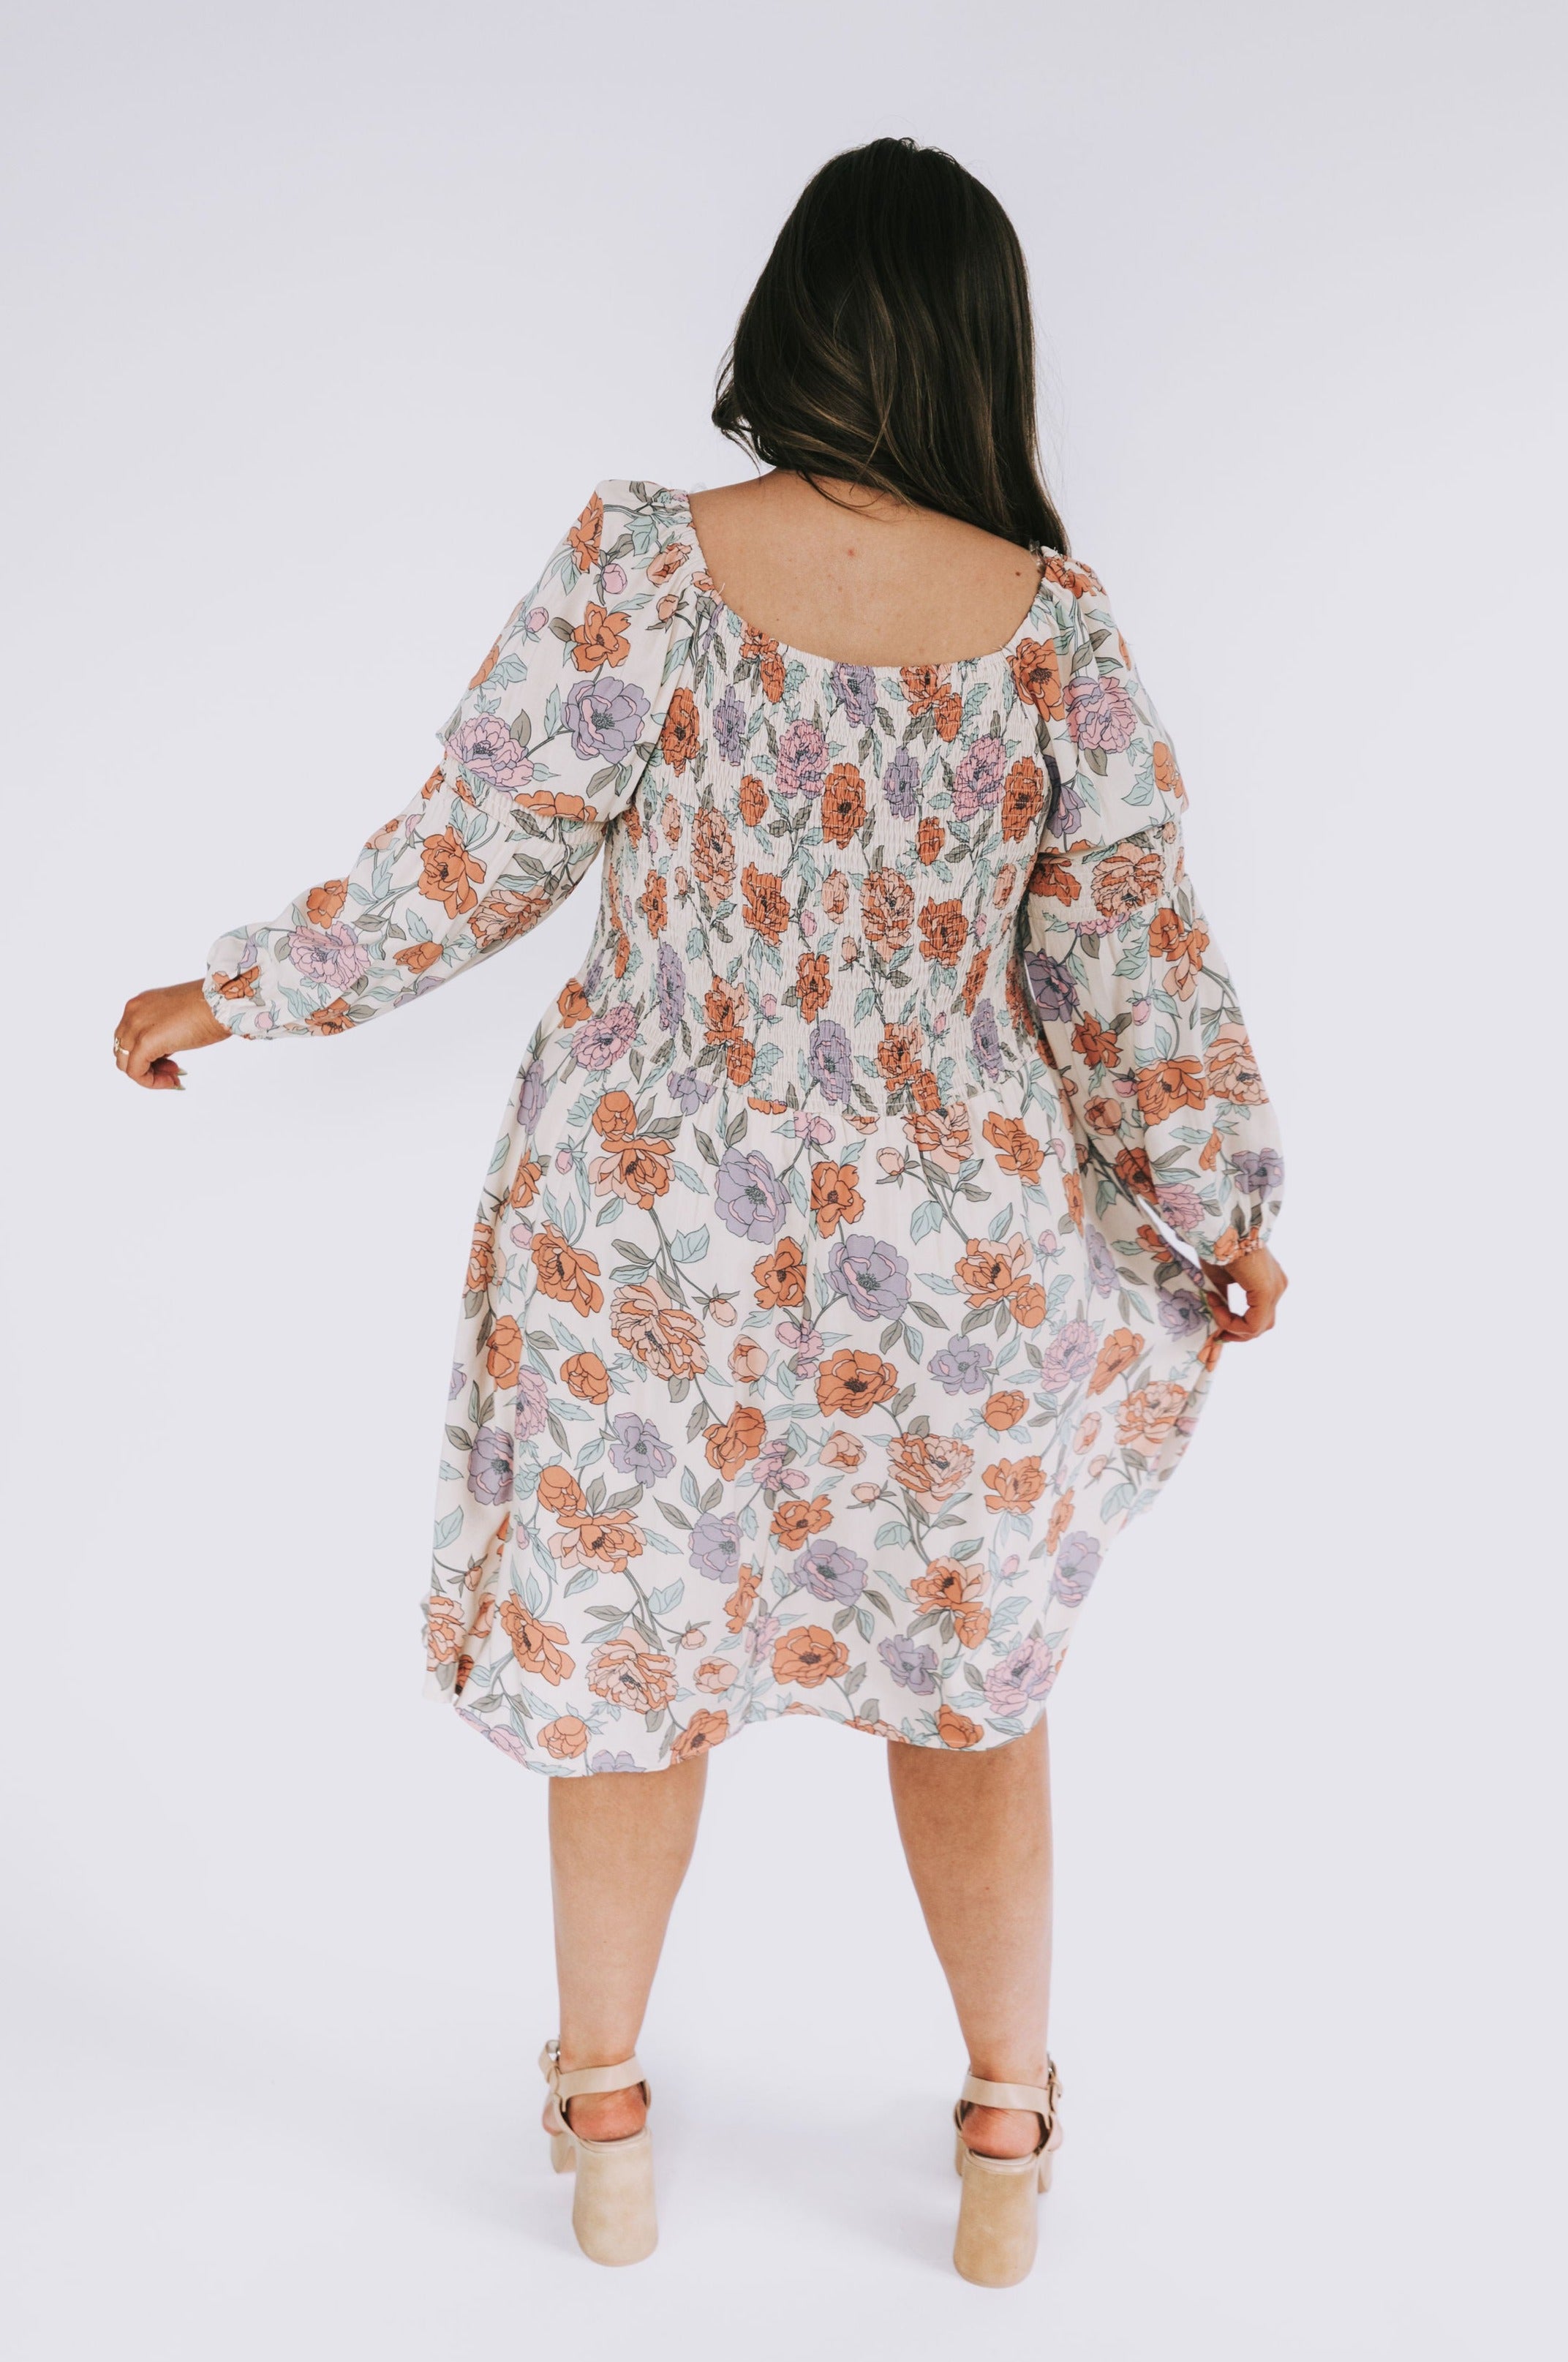 PLUS SIZE - Realize This Dress